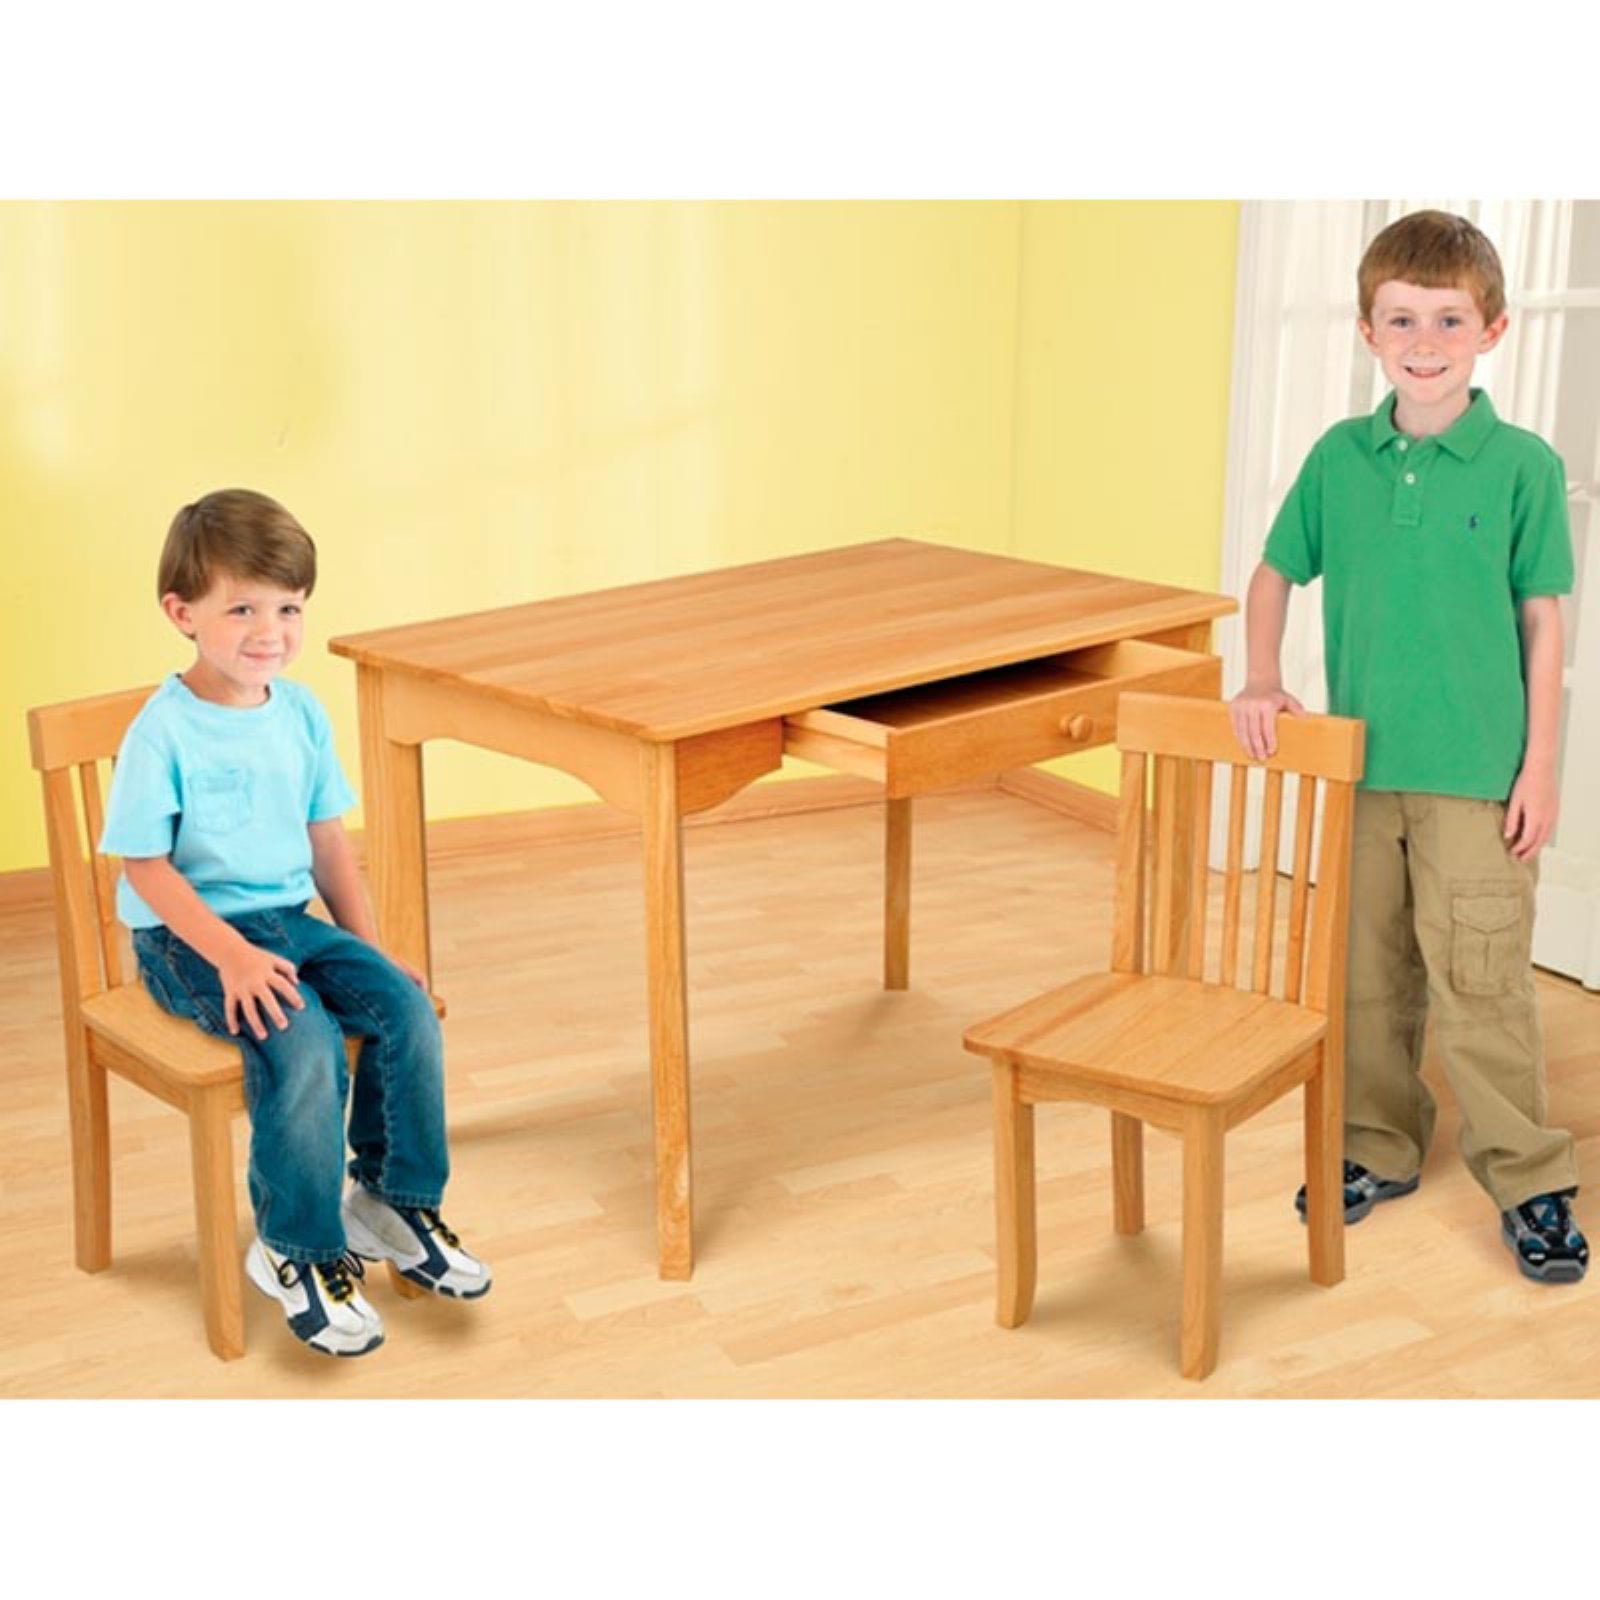 Kidkraft Avalon Table And Chair Set Natural Walmart regarding kidkraft avalon table and chair set – natural 26621 with regard to Home